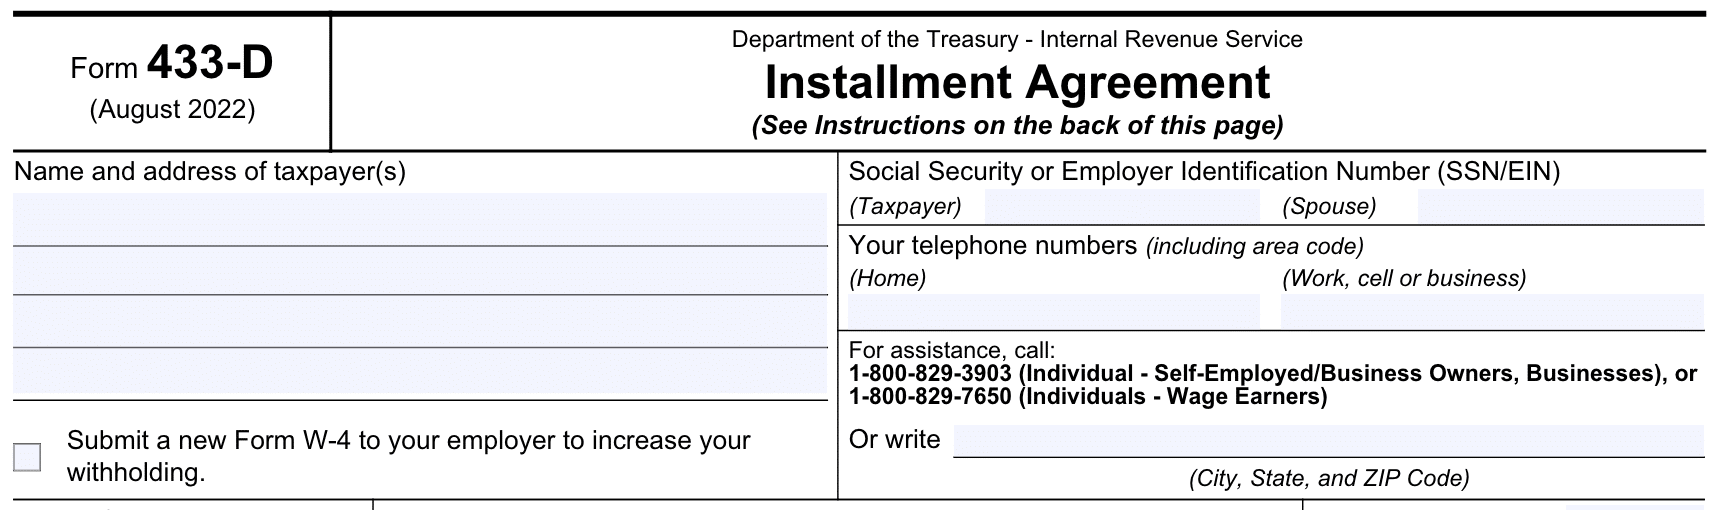 IRS Form 433-D